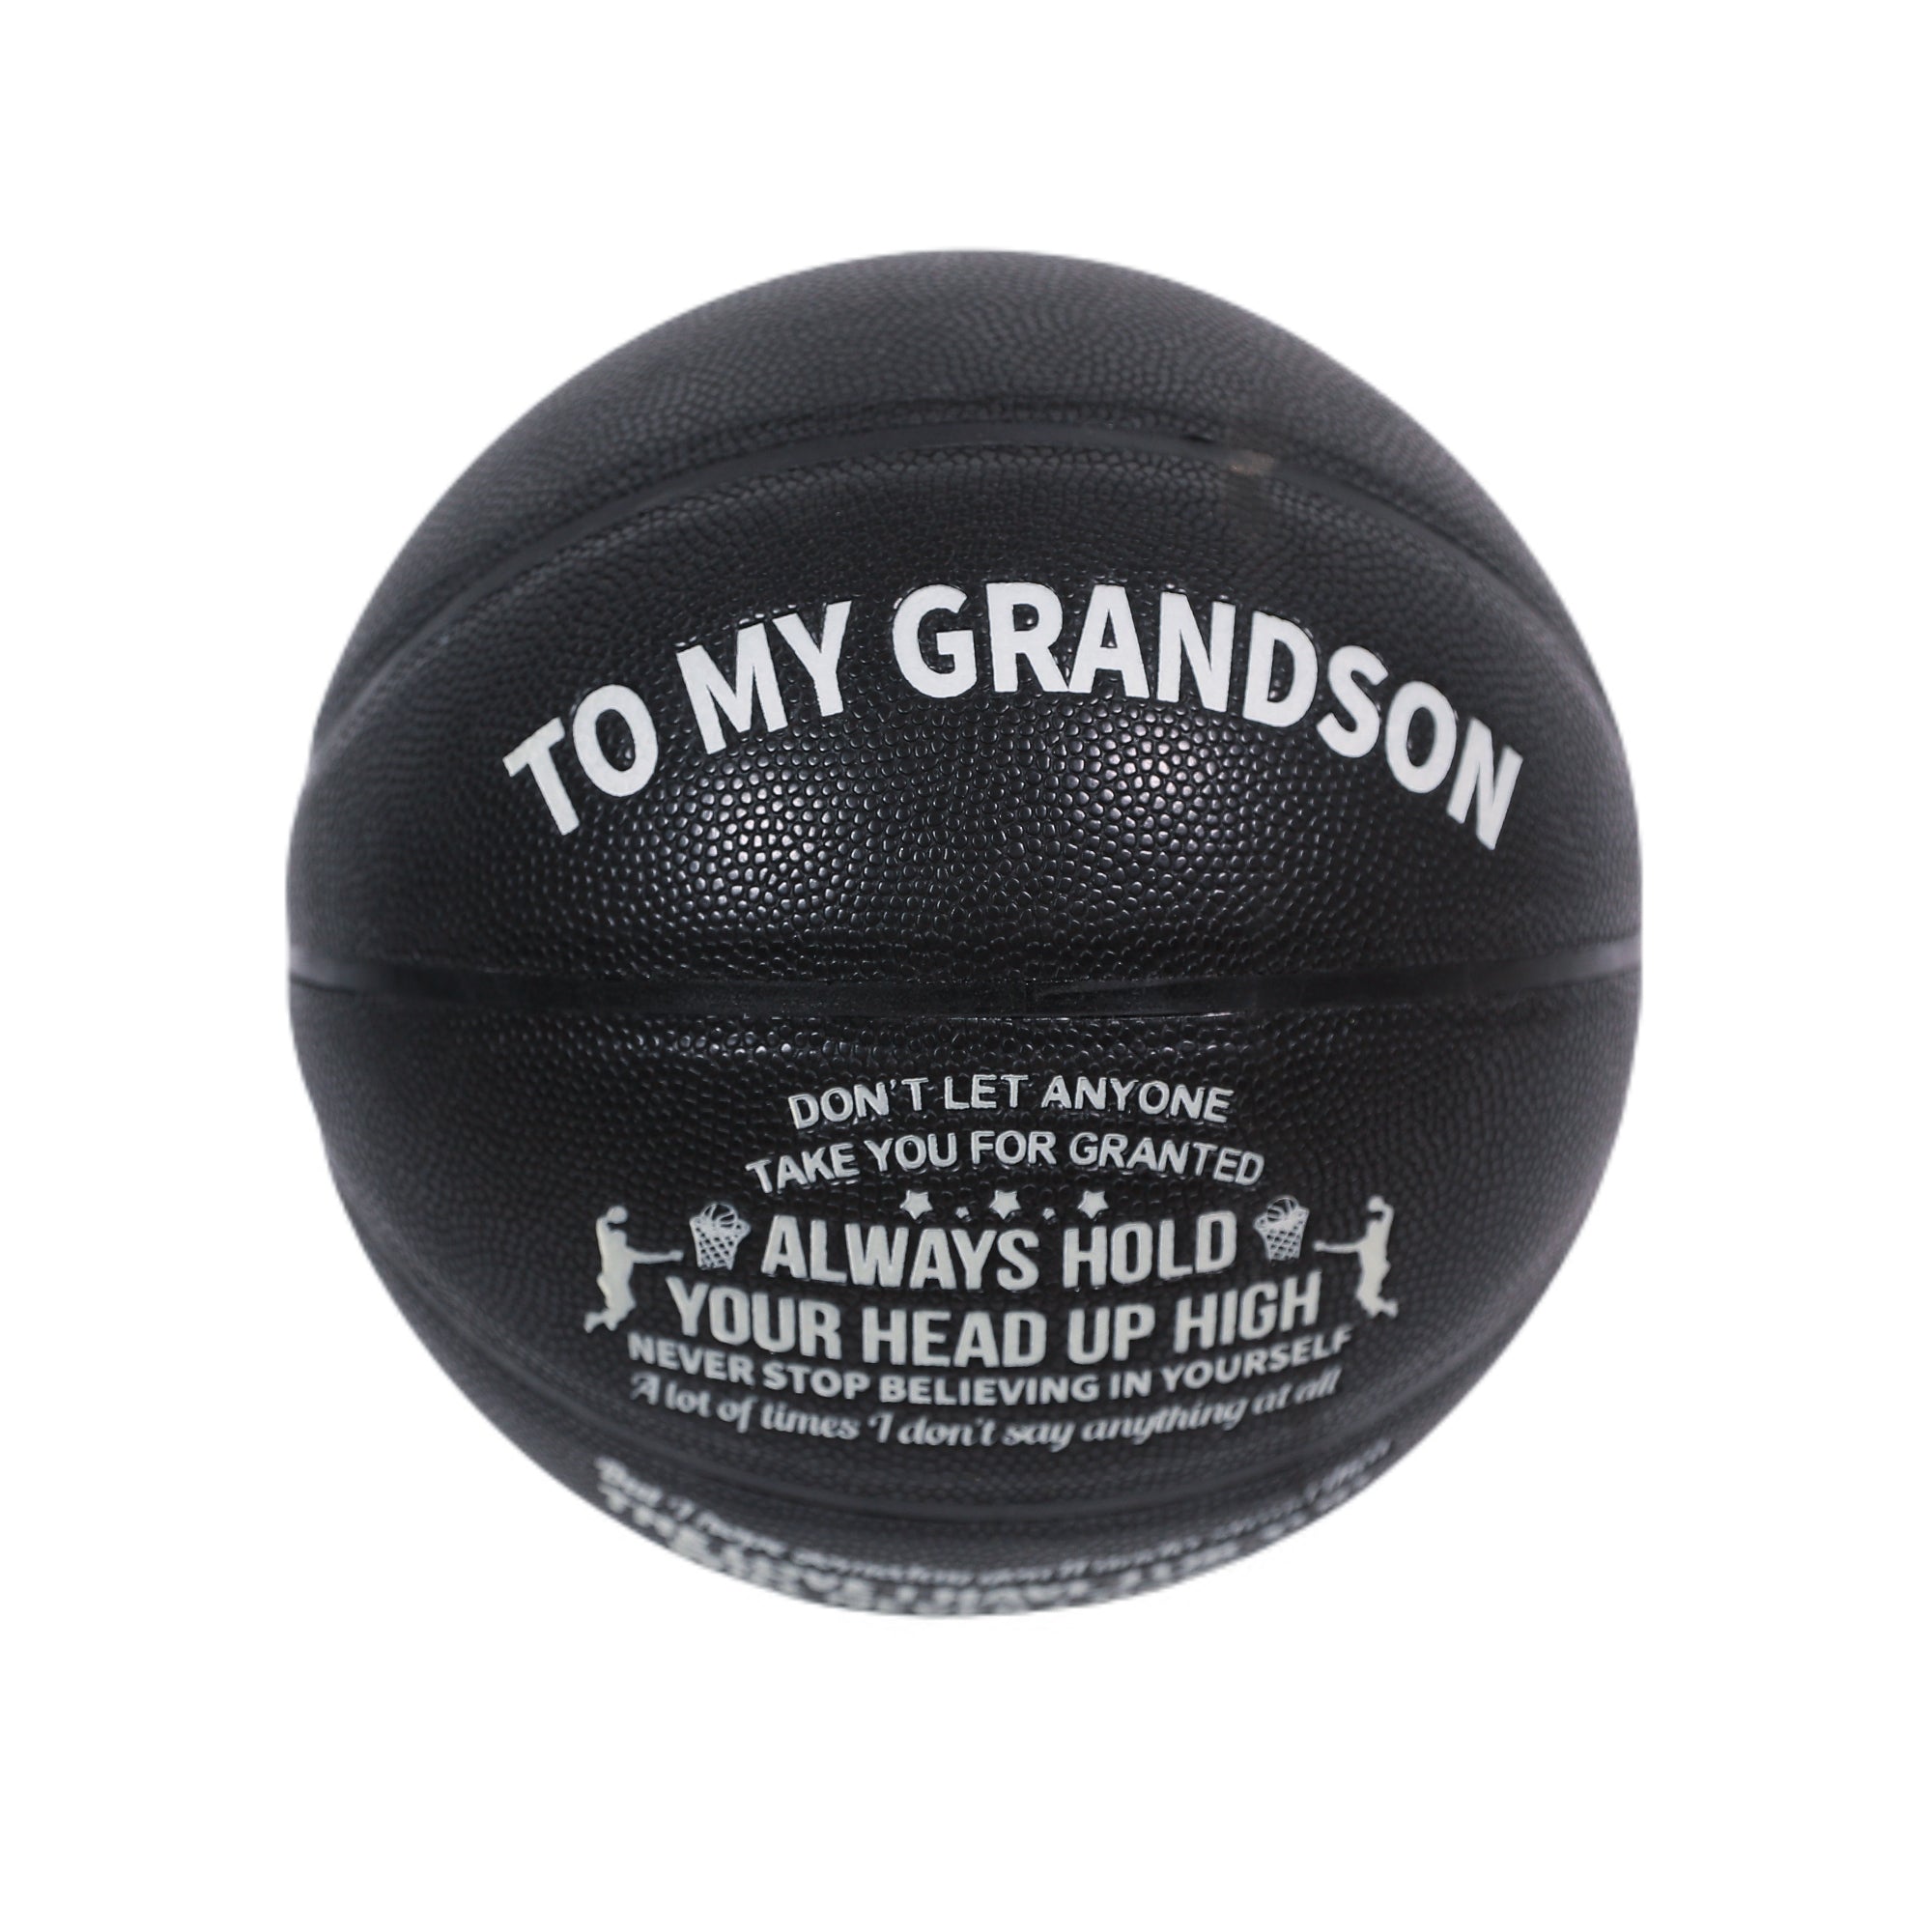 Familywatchs Gift Customized Personalise luminous Basketballs For Grandson,Size 7 (29.5 inches) - Family Watchs